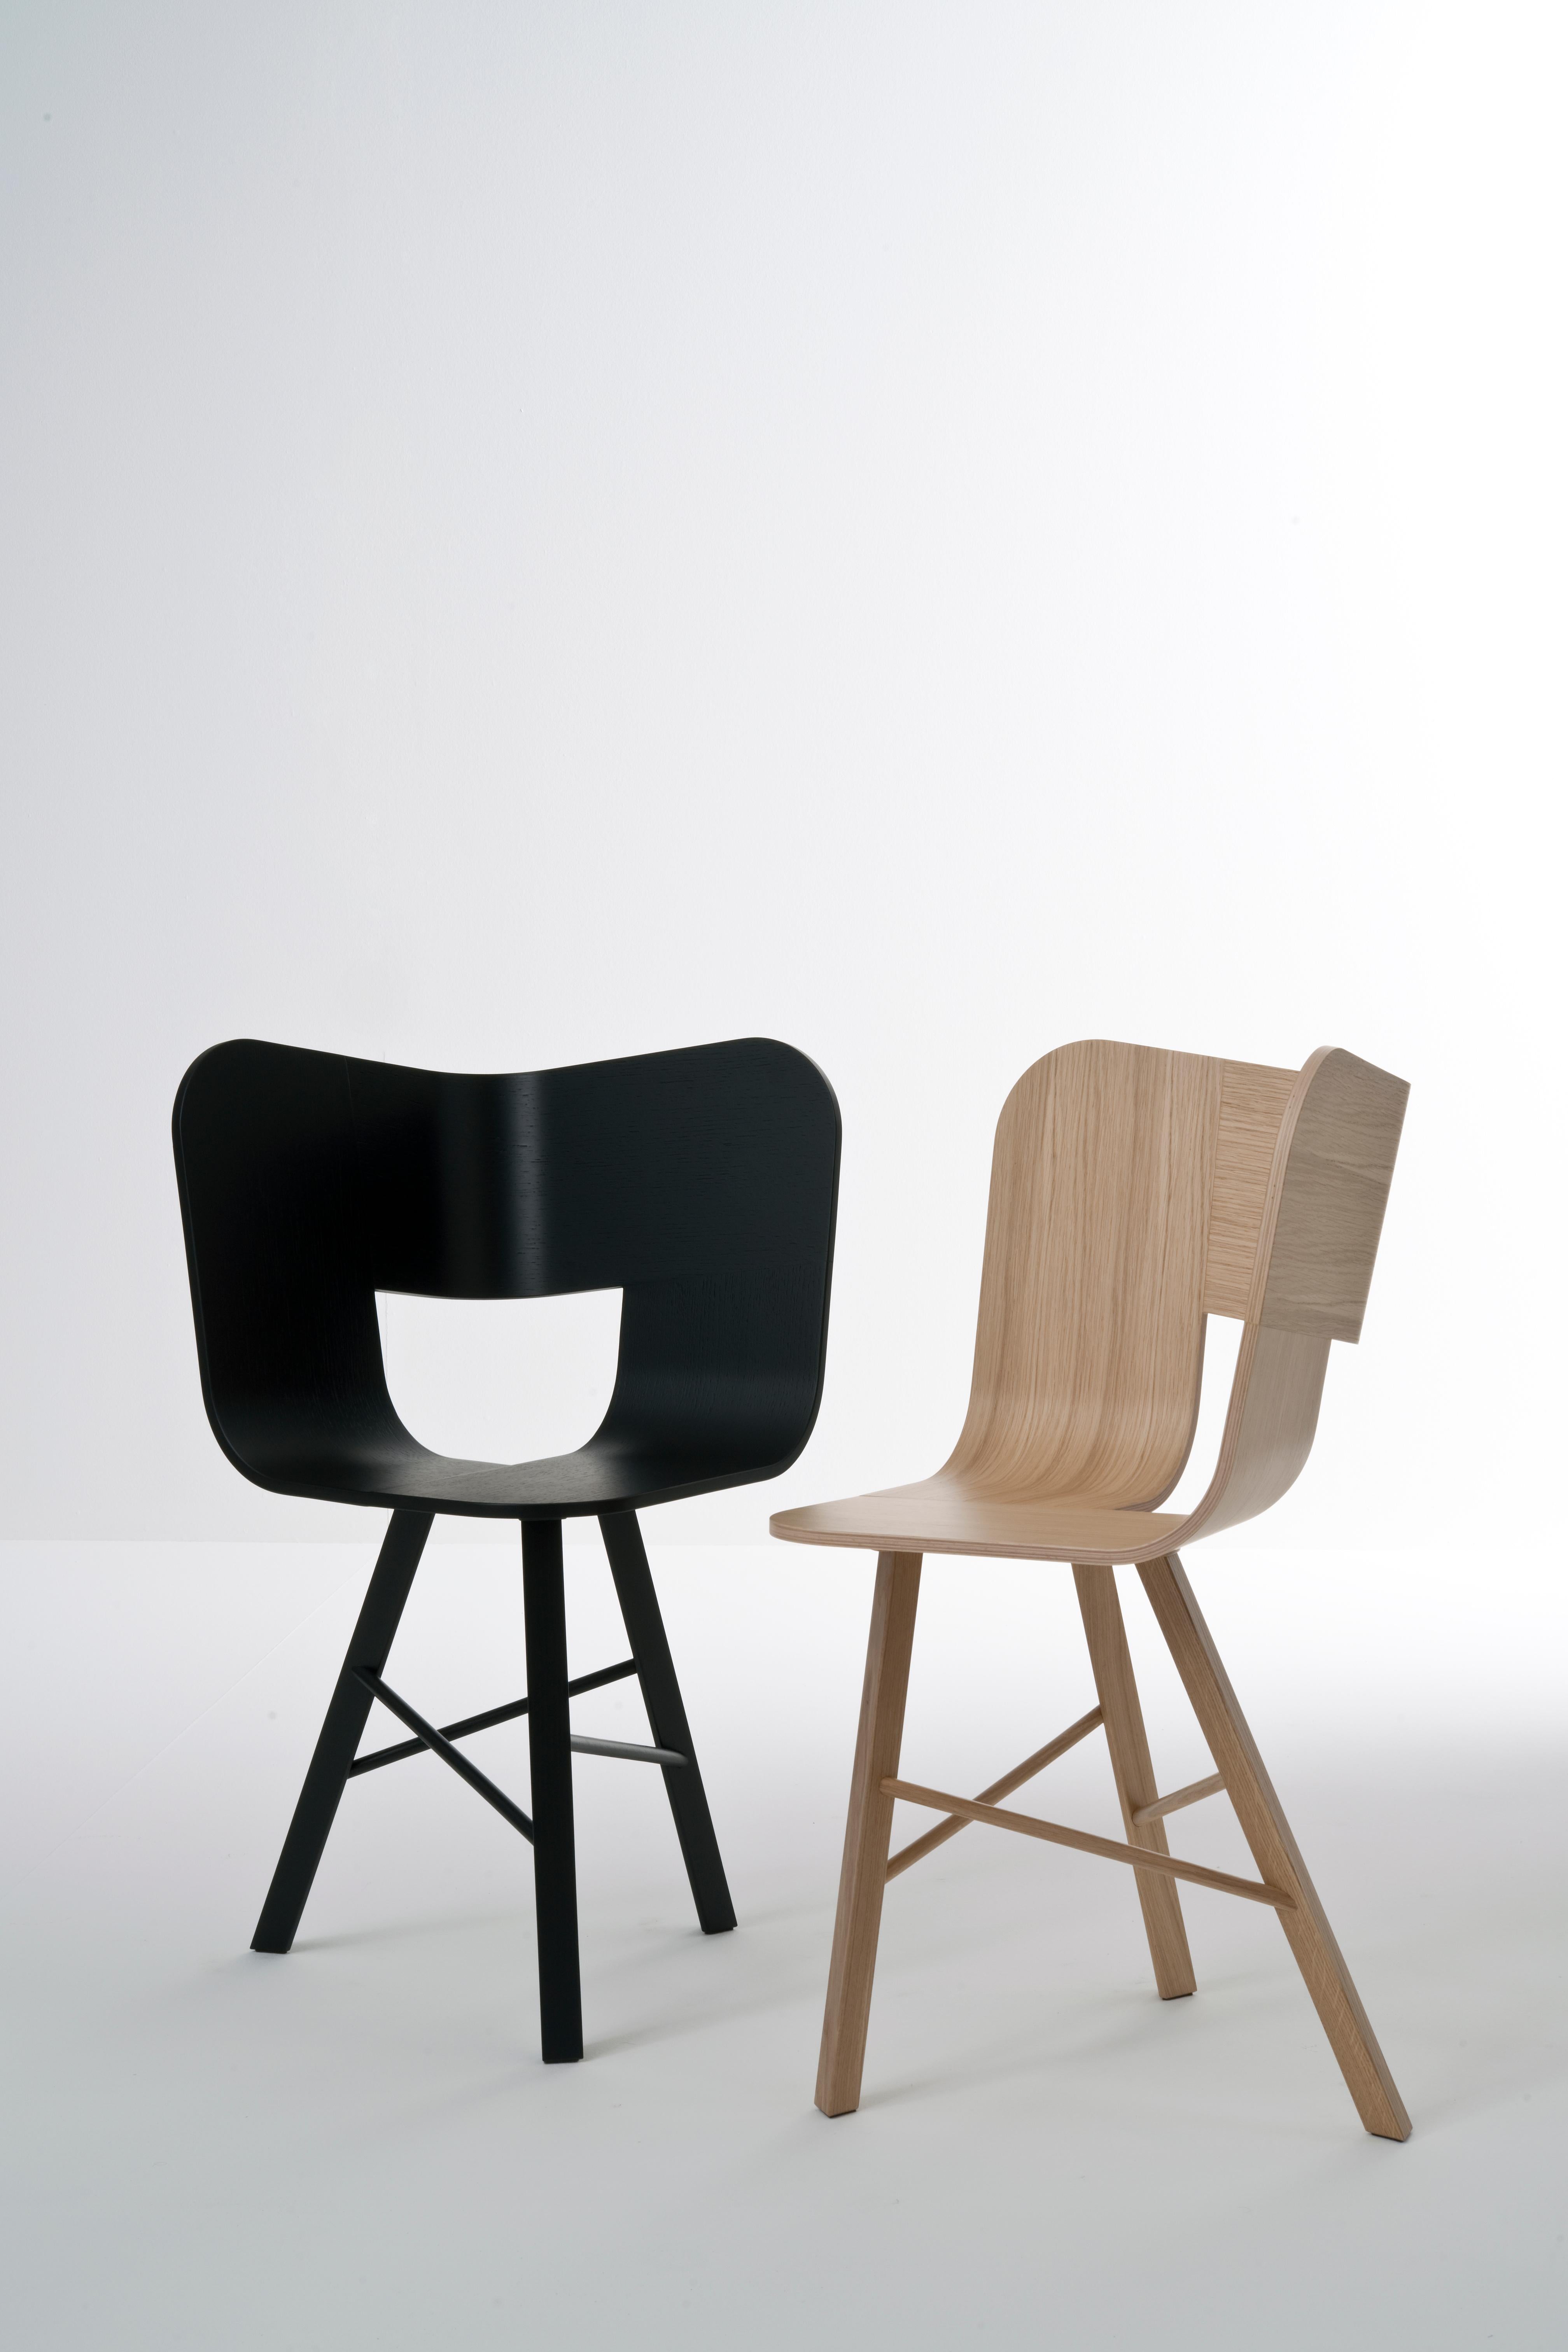 Tria wood chair is the icon of our collection. It's a table chair, but many people use it as a sculpture for the ambience, in an entrance, a bedroom, in a living room, or in any corner of the house. It recalls the impossible forms of Dutch graphic